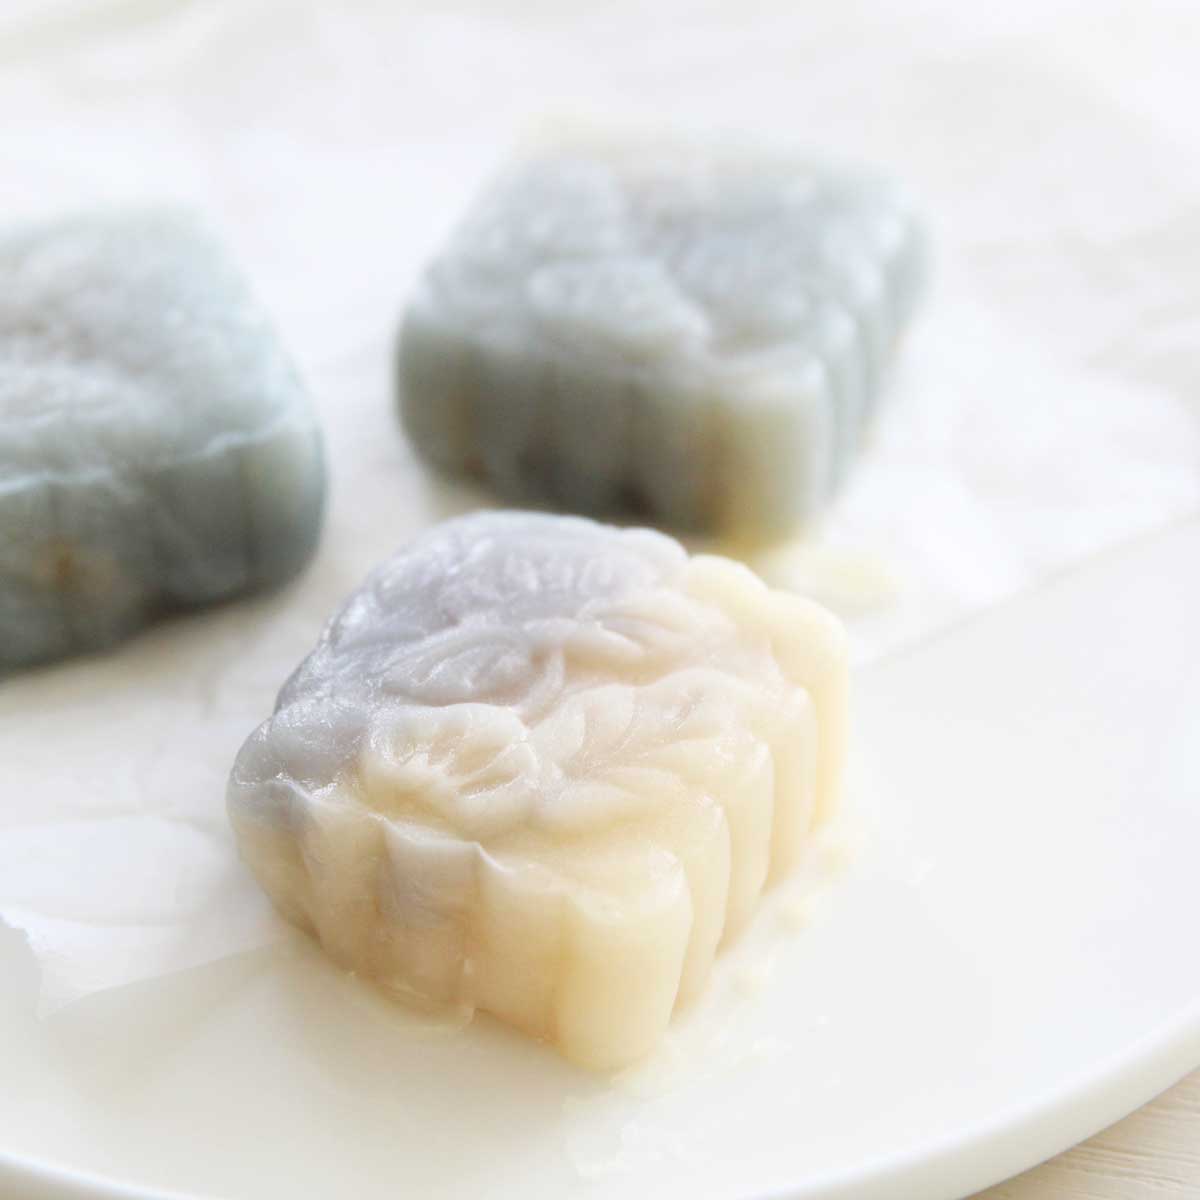 10 Minute Butterfly Pea Snowskin Mooncakes (No Steaming Required!) - Ube Sweet Rice Balls